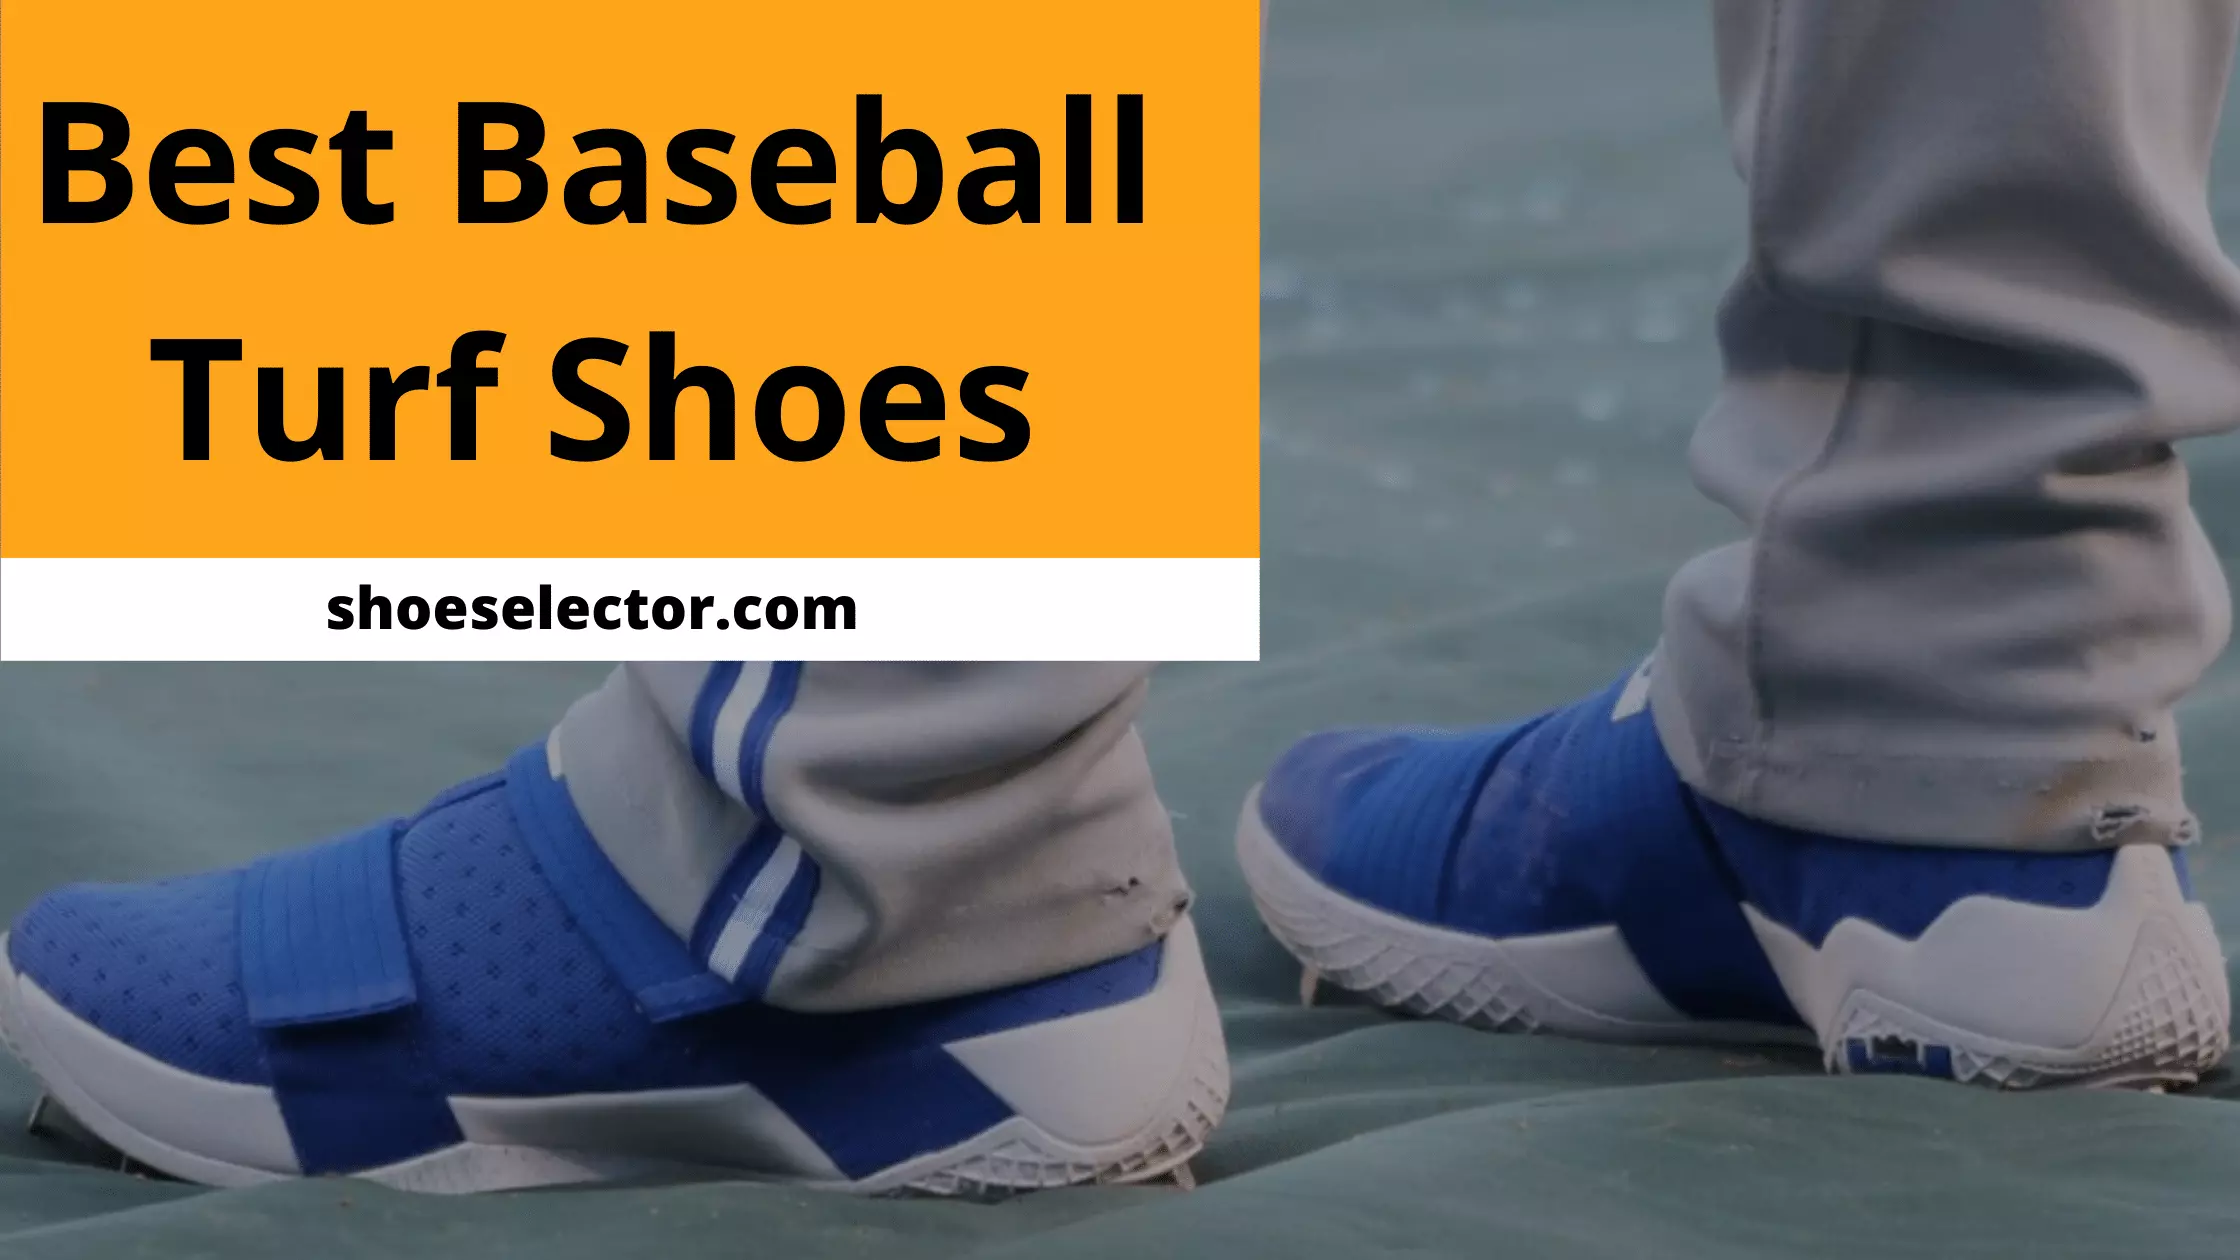 Best Baseball Turf Shoes With Shopping Tips